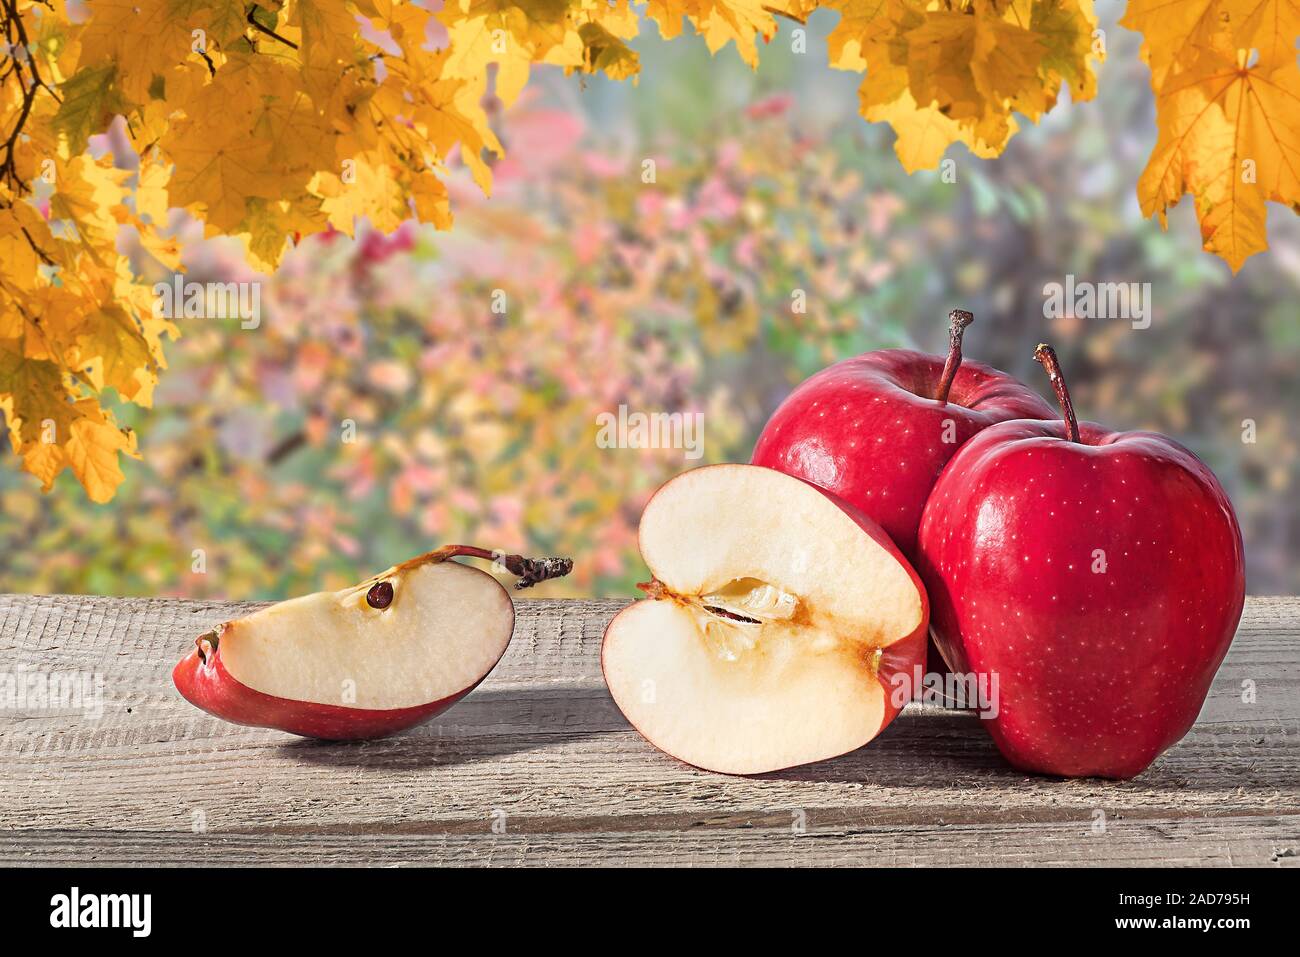 Several apples on a wooden table Stock Photo